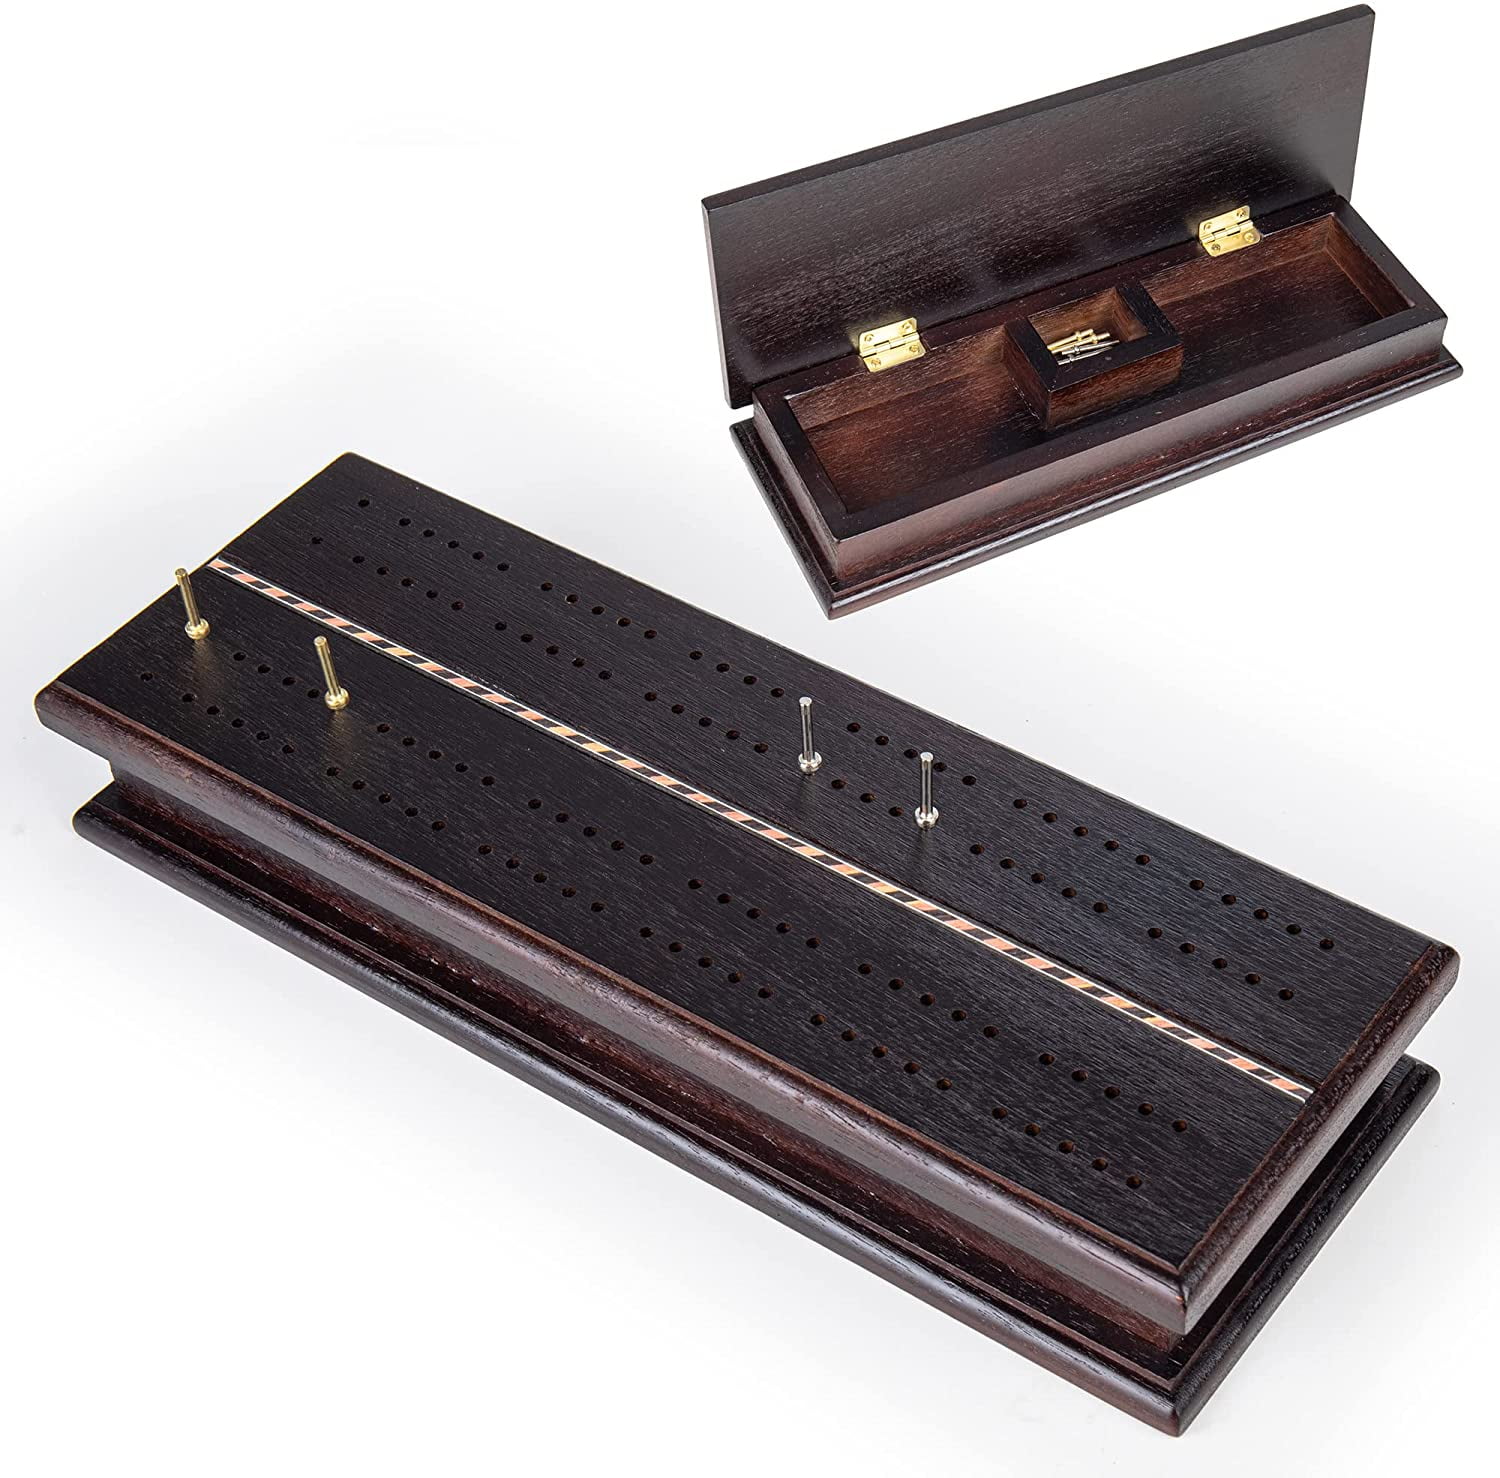 Regal Games Wooden Cribbage Board Game with Metal Pegs and a Standard Deck of Playing Cards 